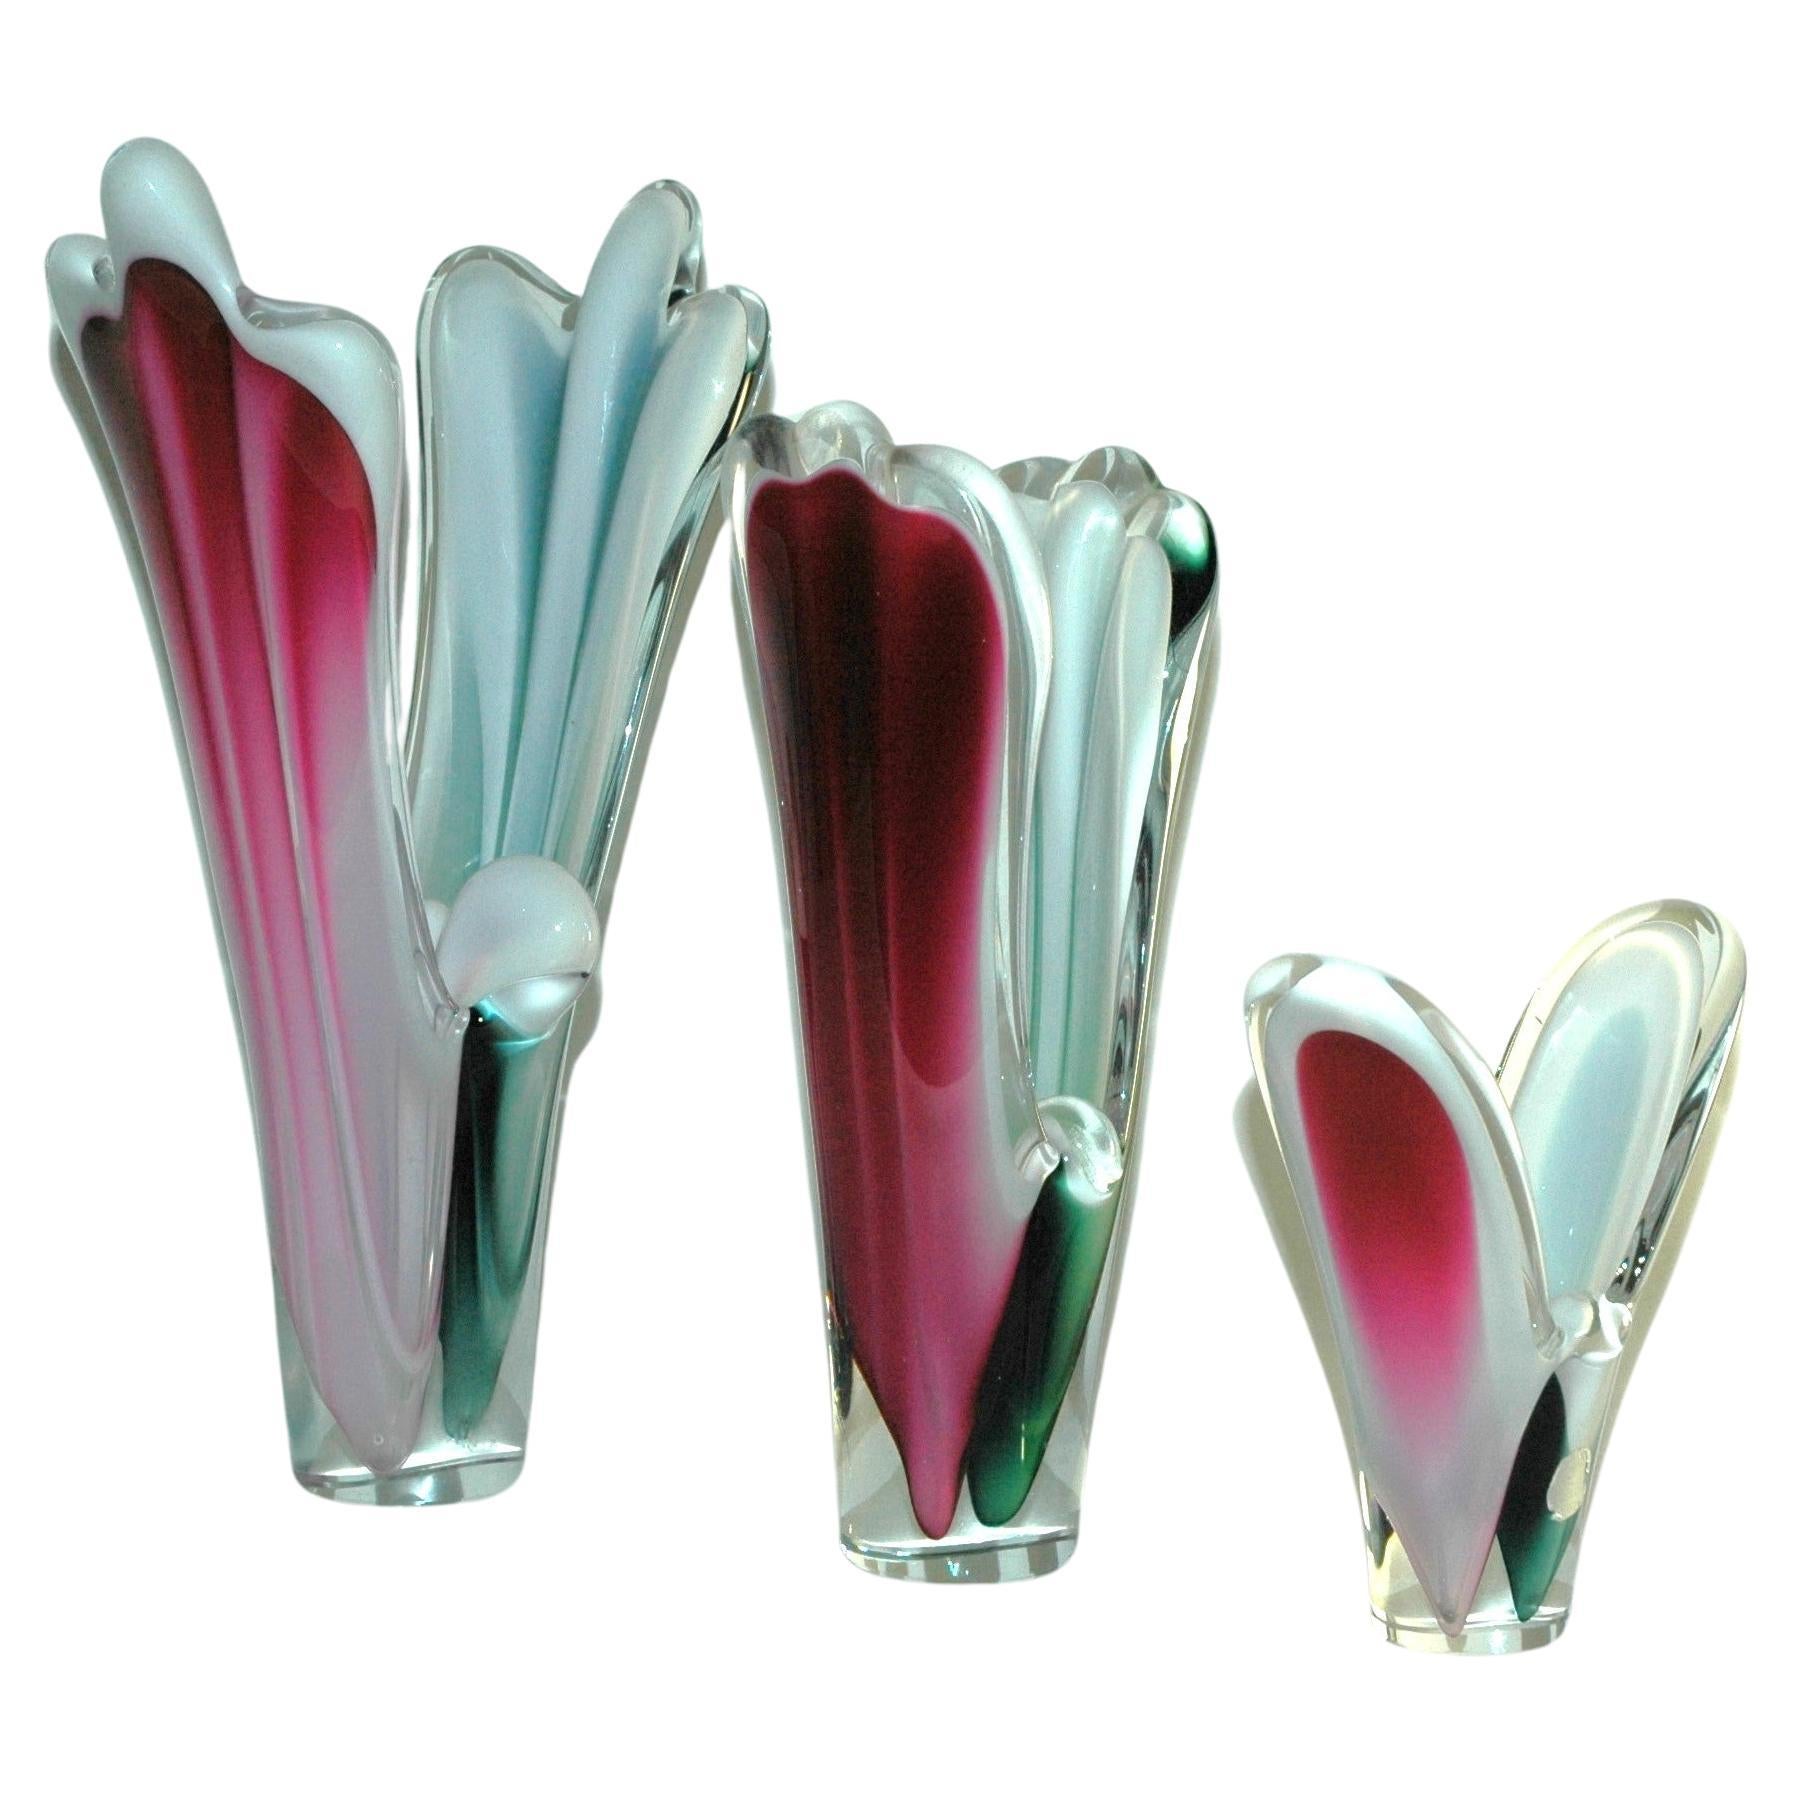 Exciting 3 parts of the famous Flygsfors Coquille mid 19th century glass vase For Sale